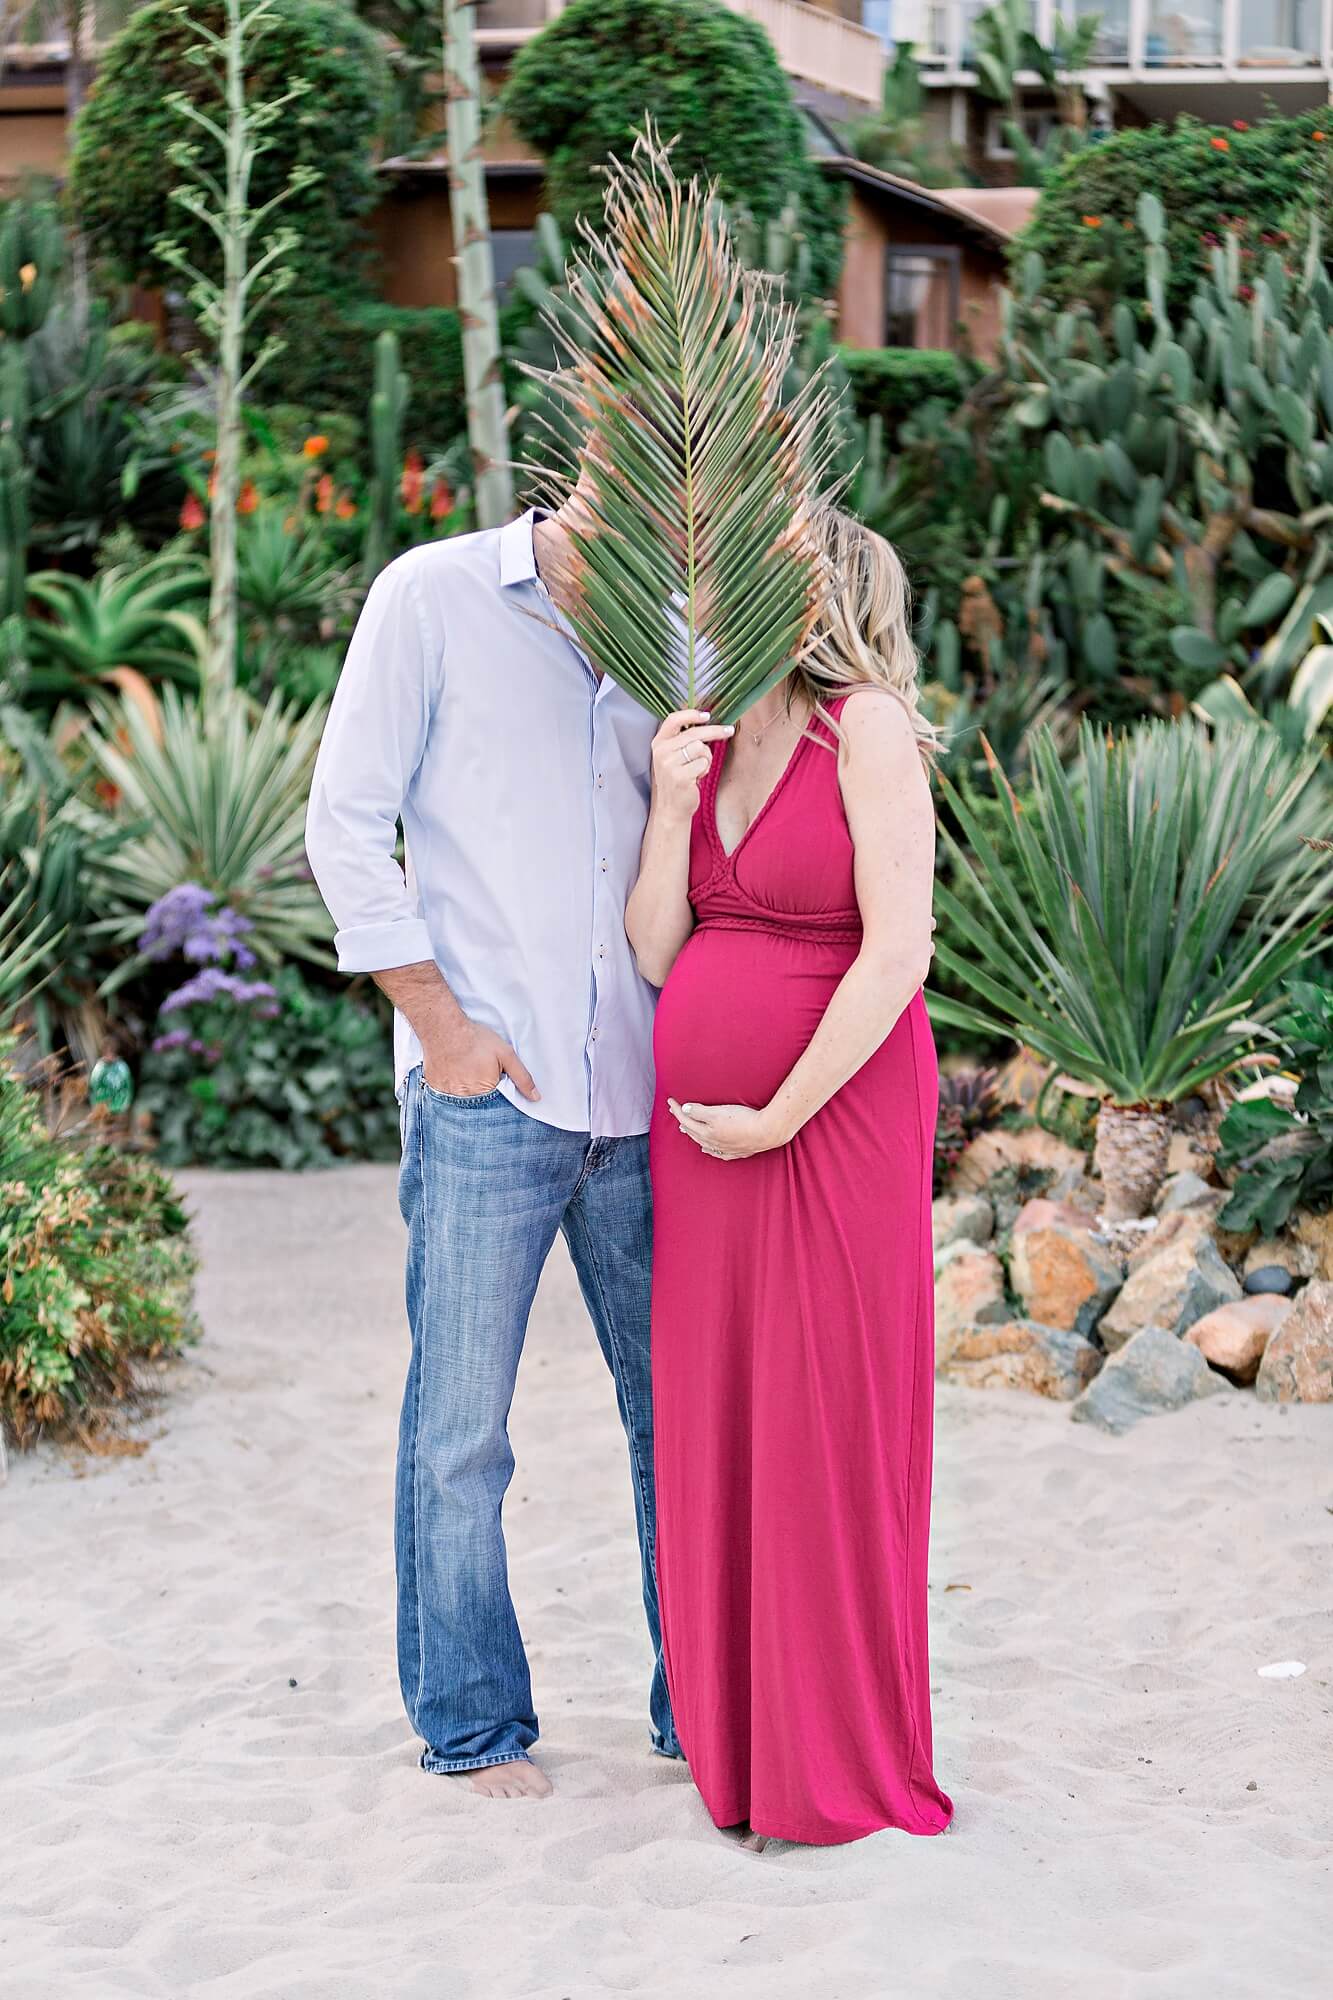 WHAT COLORS TO WEAR FOR YOUR MATERNITY PHOTOS